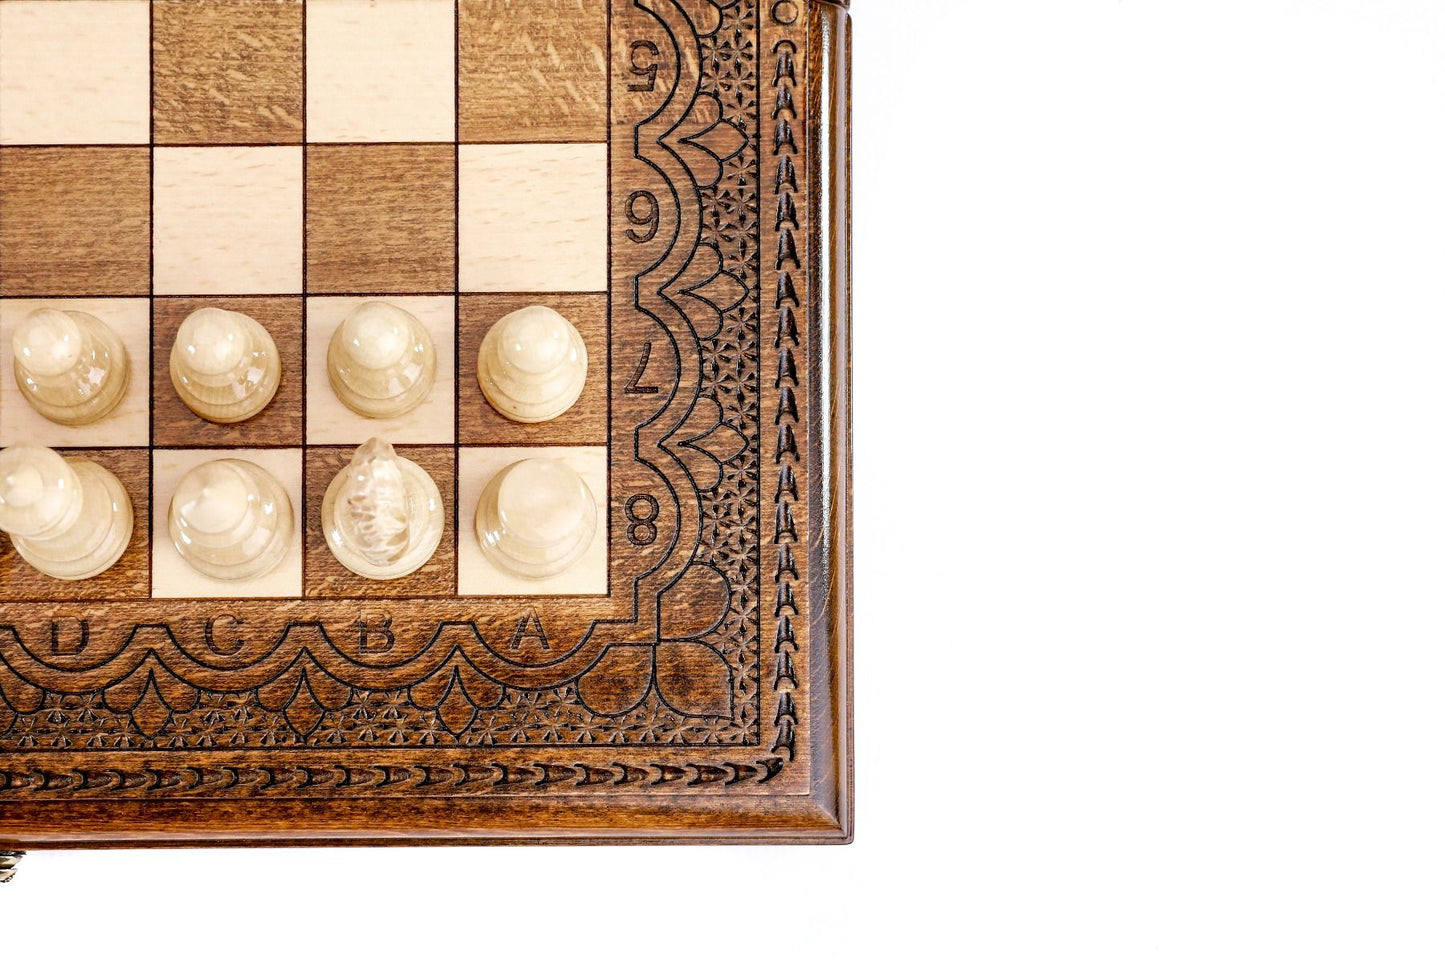 Master the game on a board that pays homage to classic chess while introducing unique aesthetic elements for a distinctive playing experience.